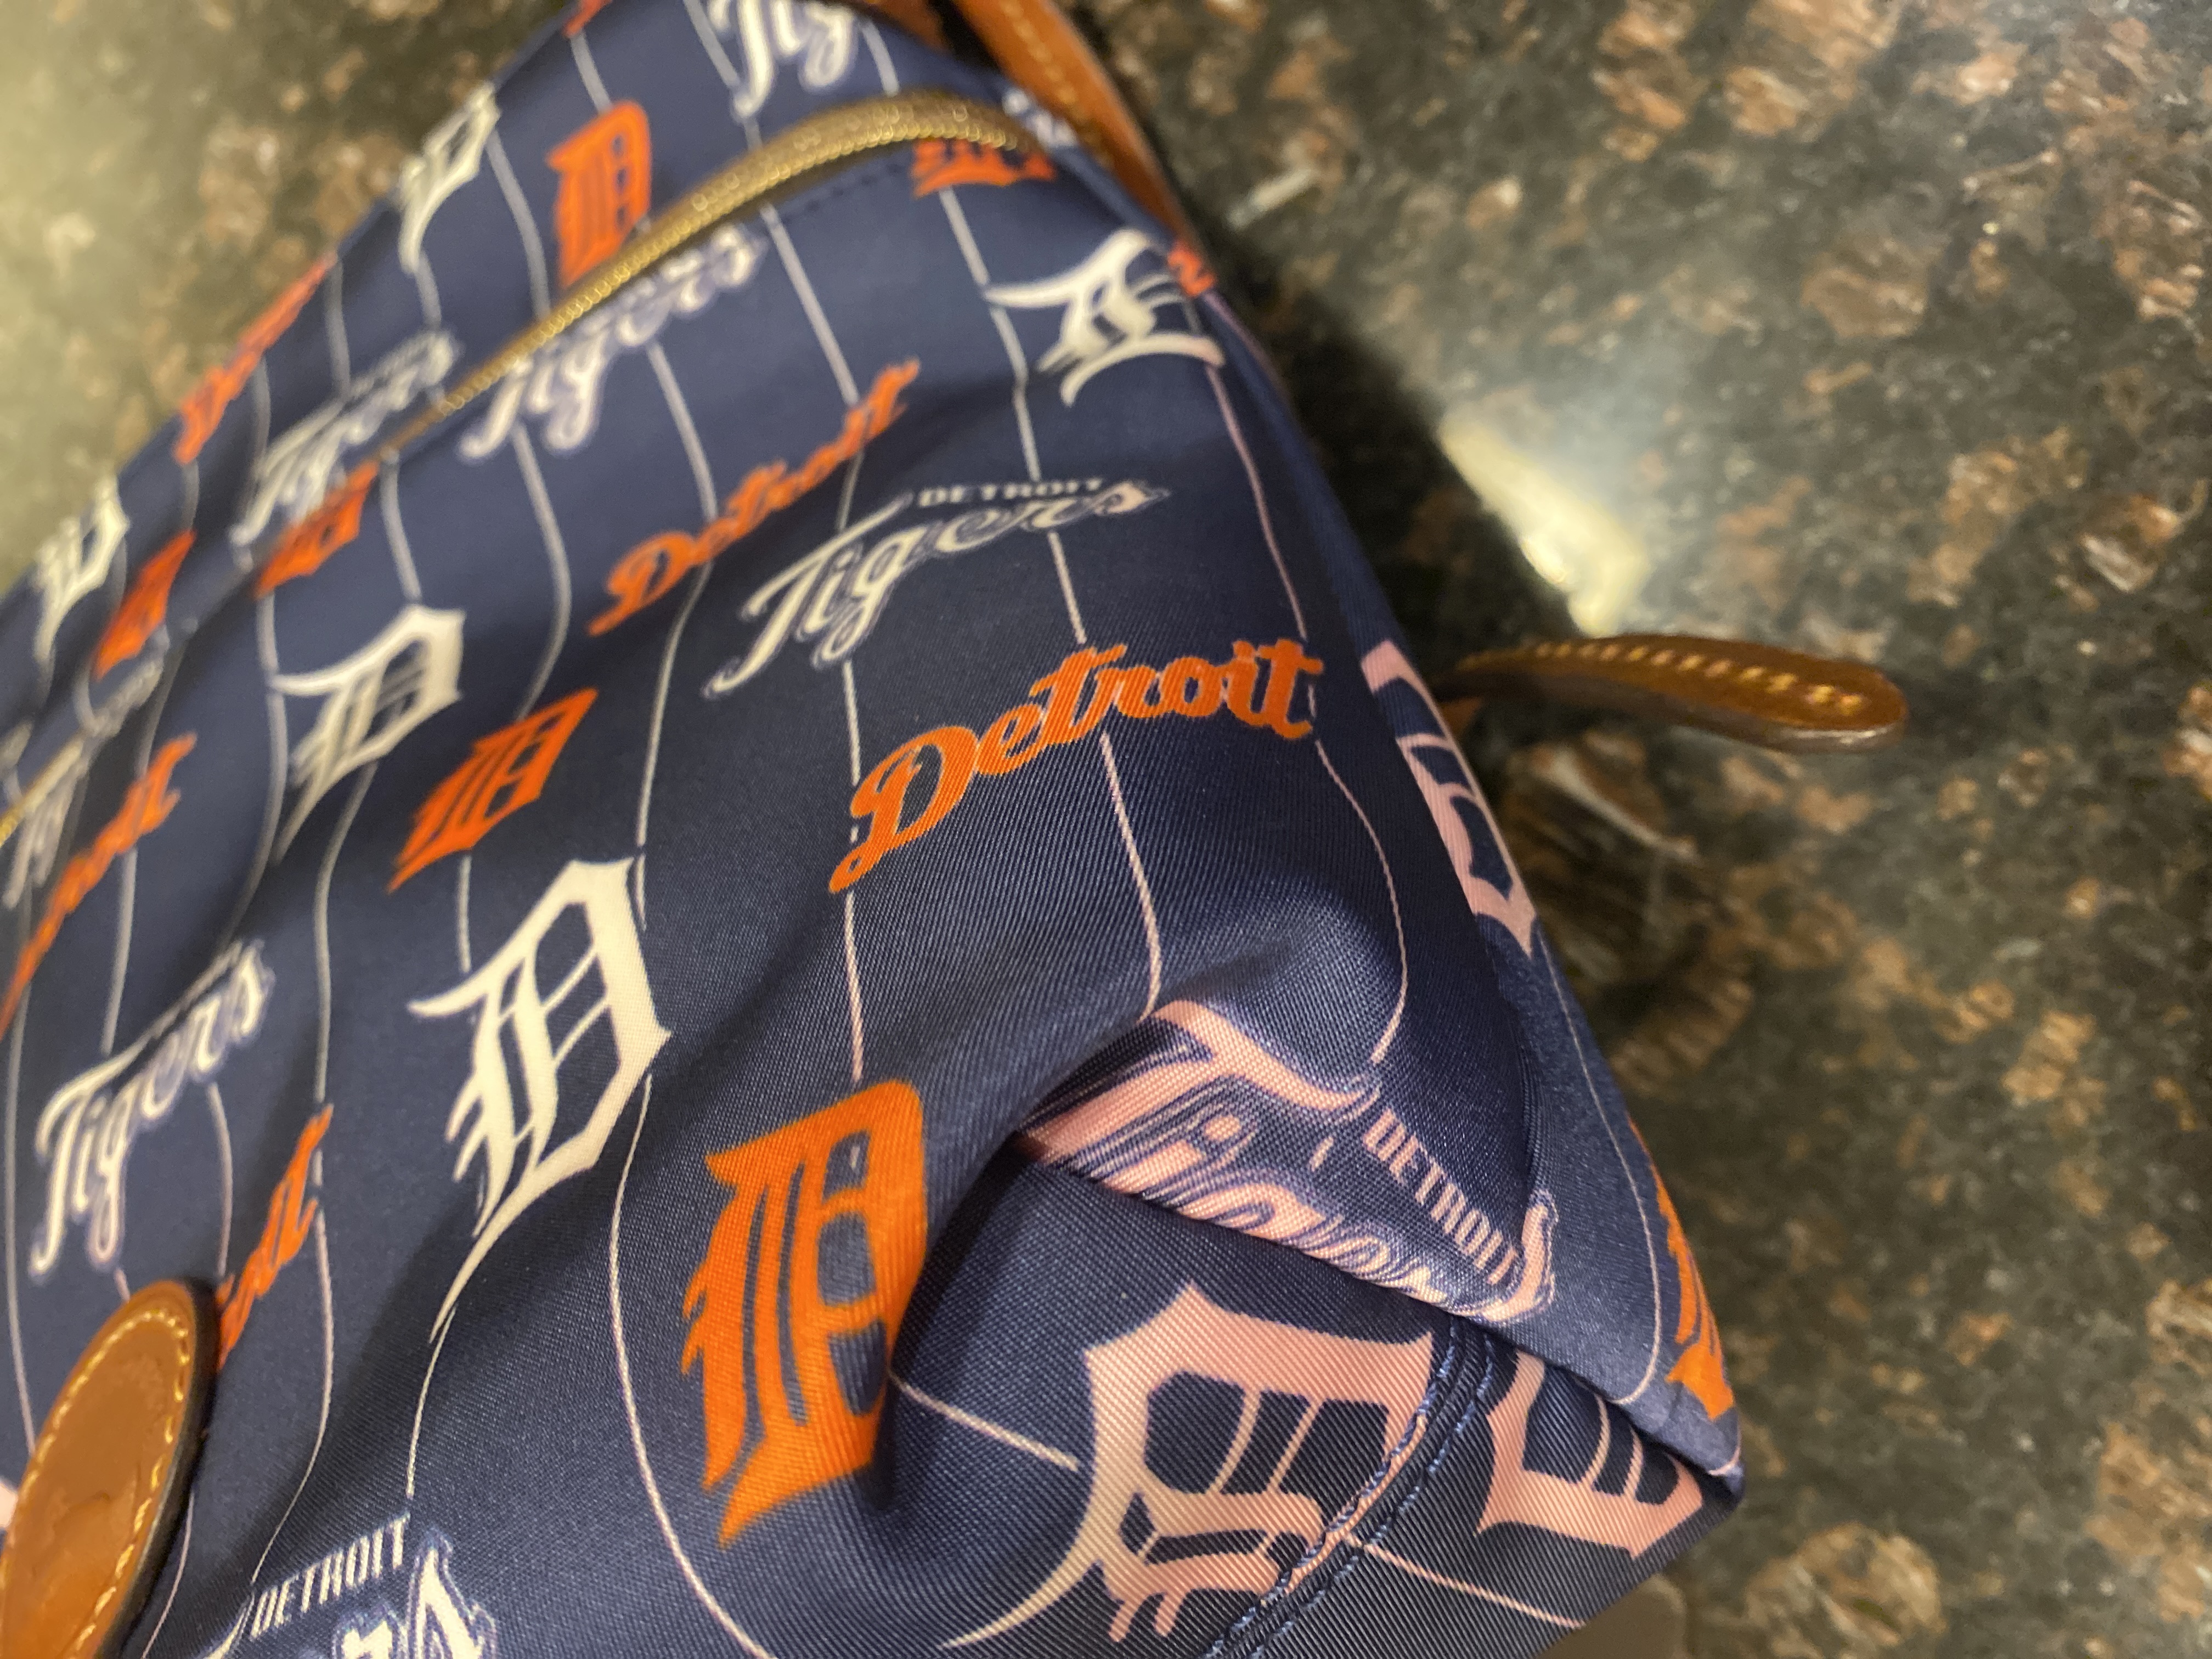 Dooney & Bourke expand MLB collection